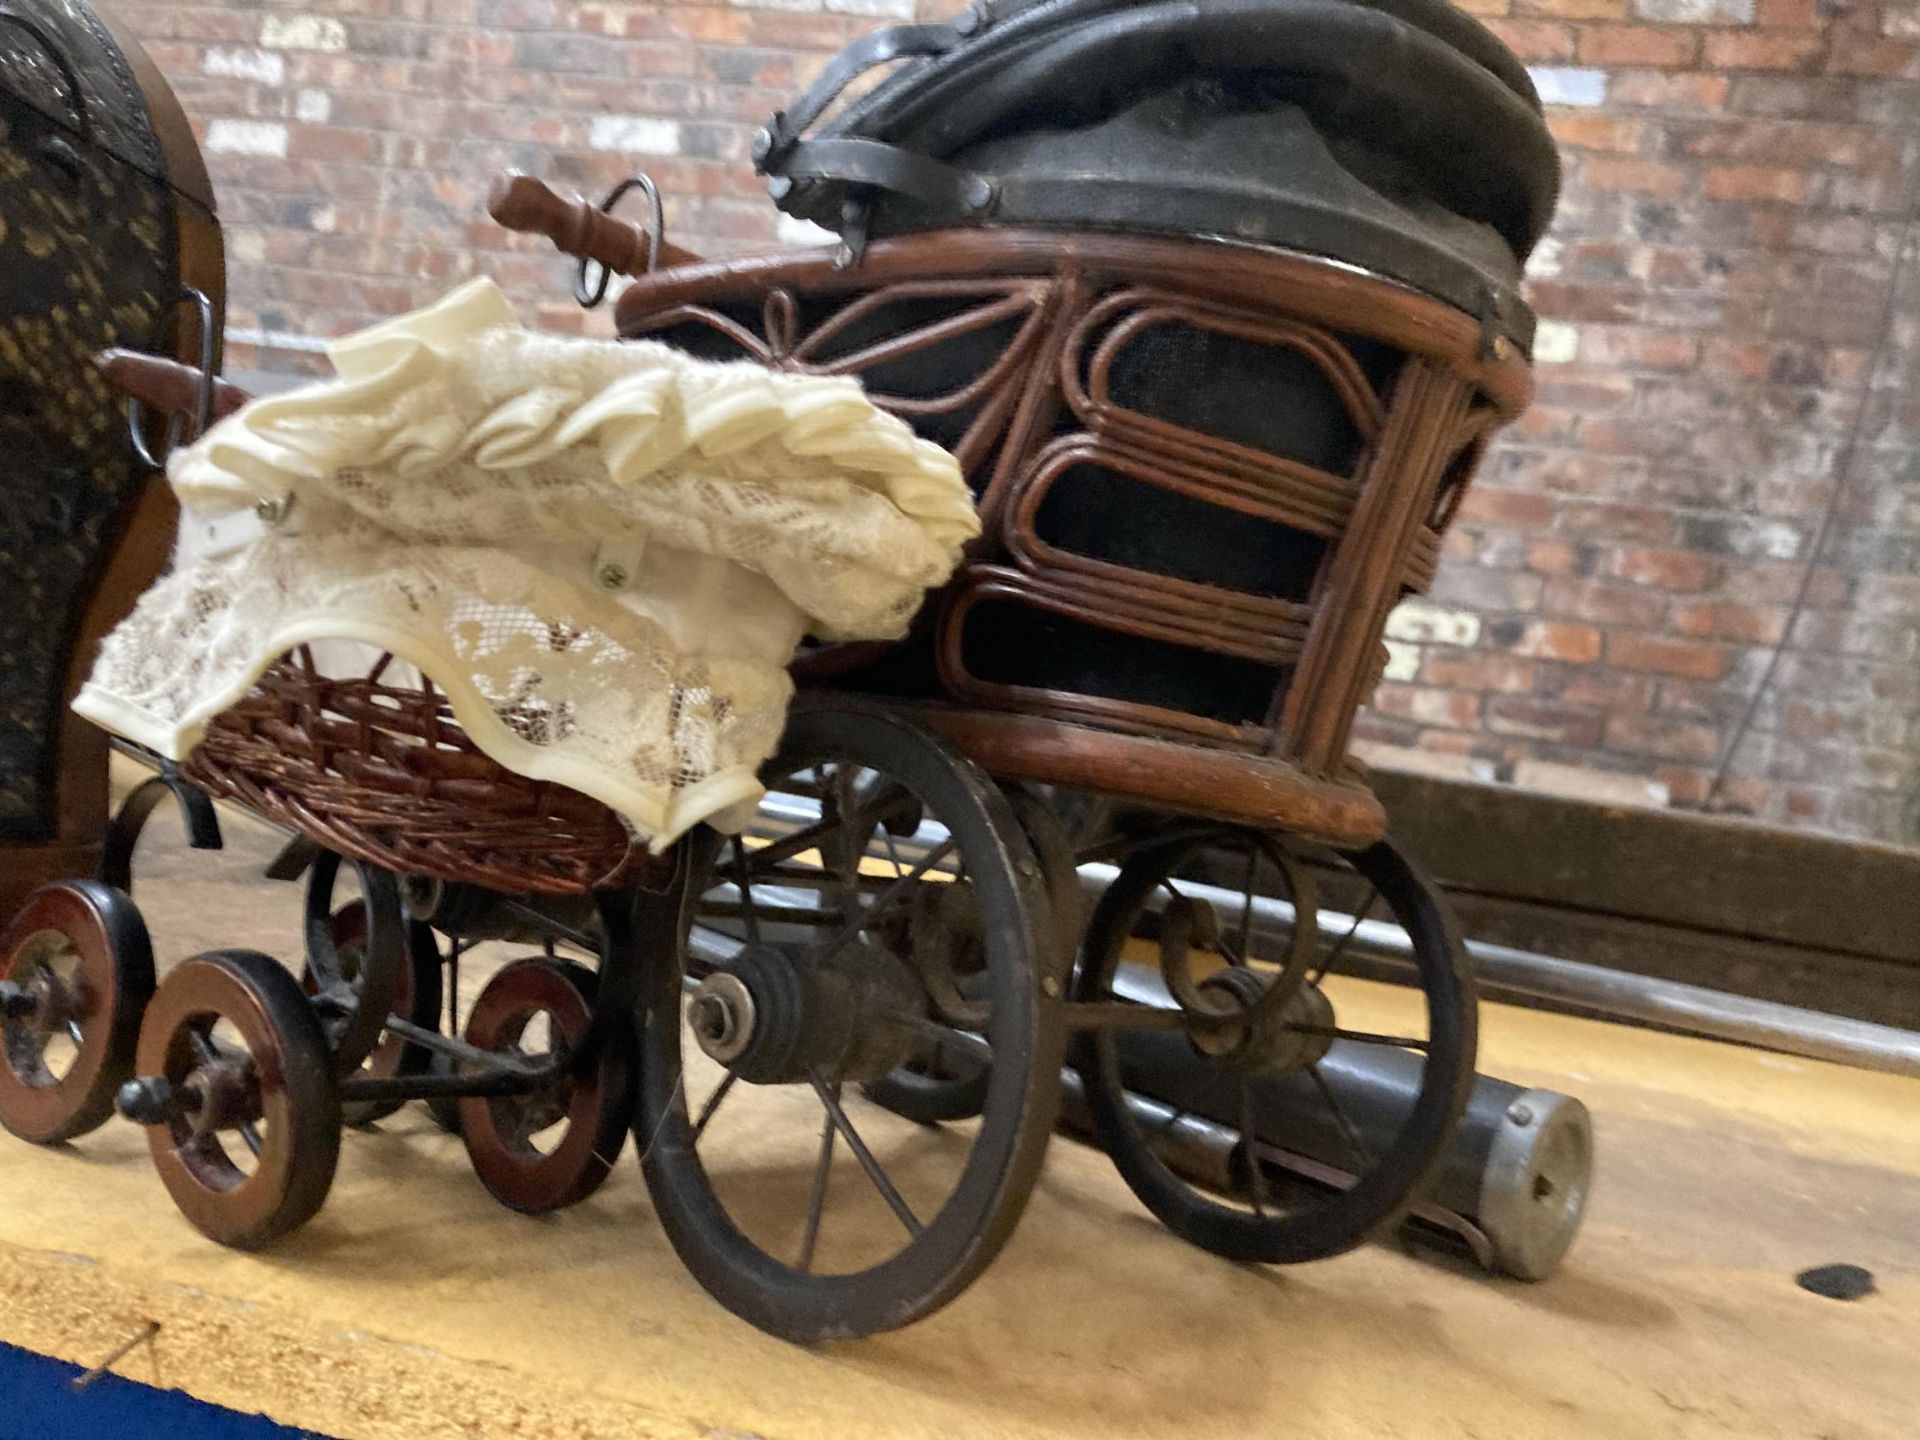 TWO VINTAGE STYLE WOODEN DOLLS PRAMS - Image 2 of 3